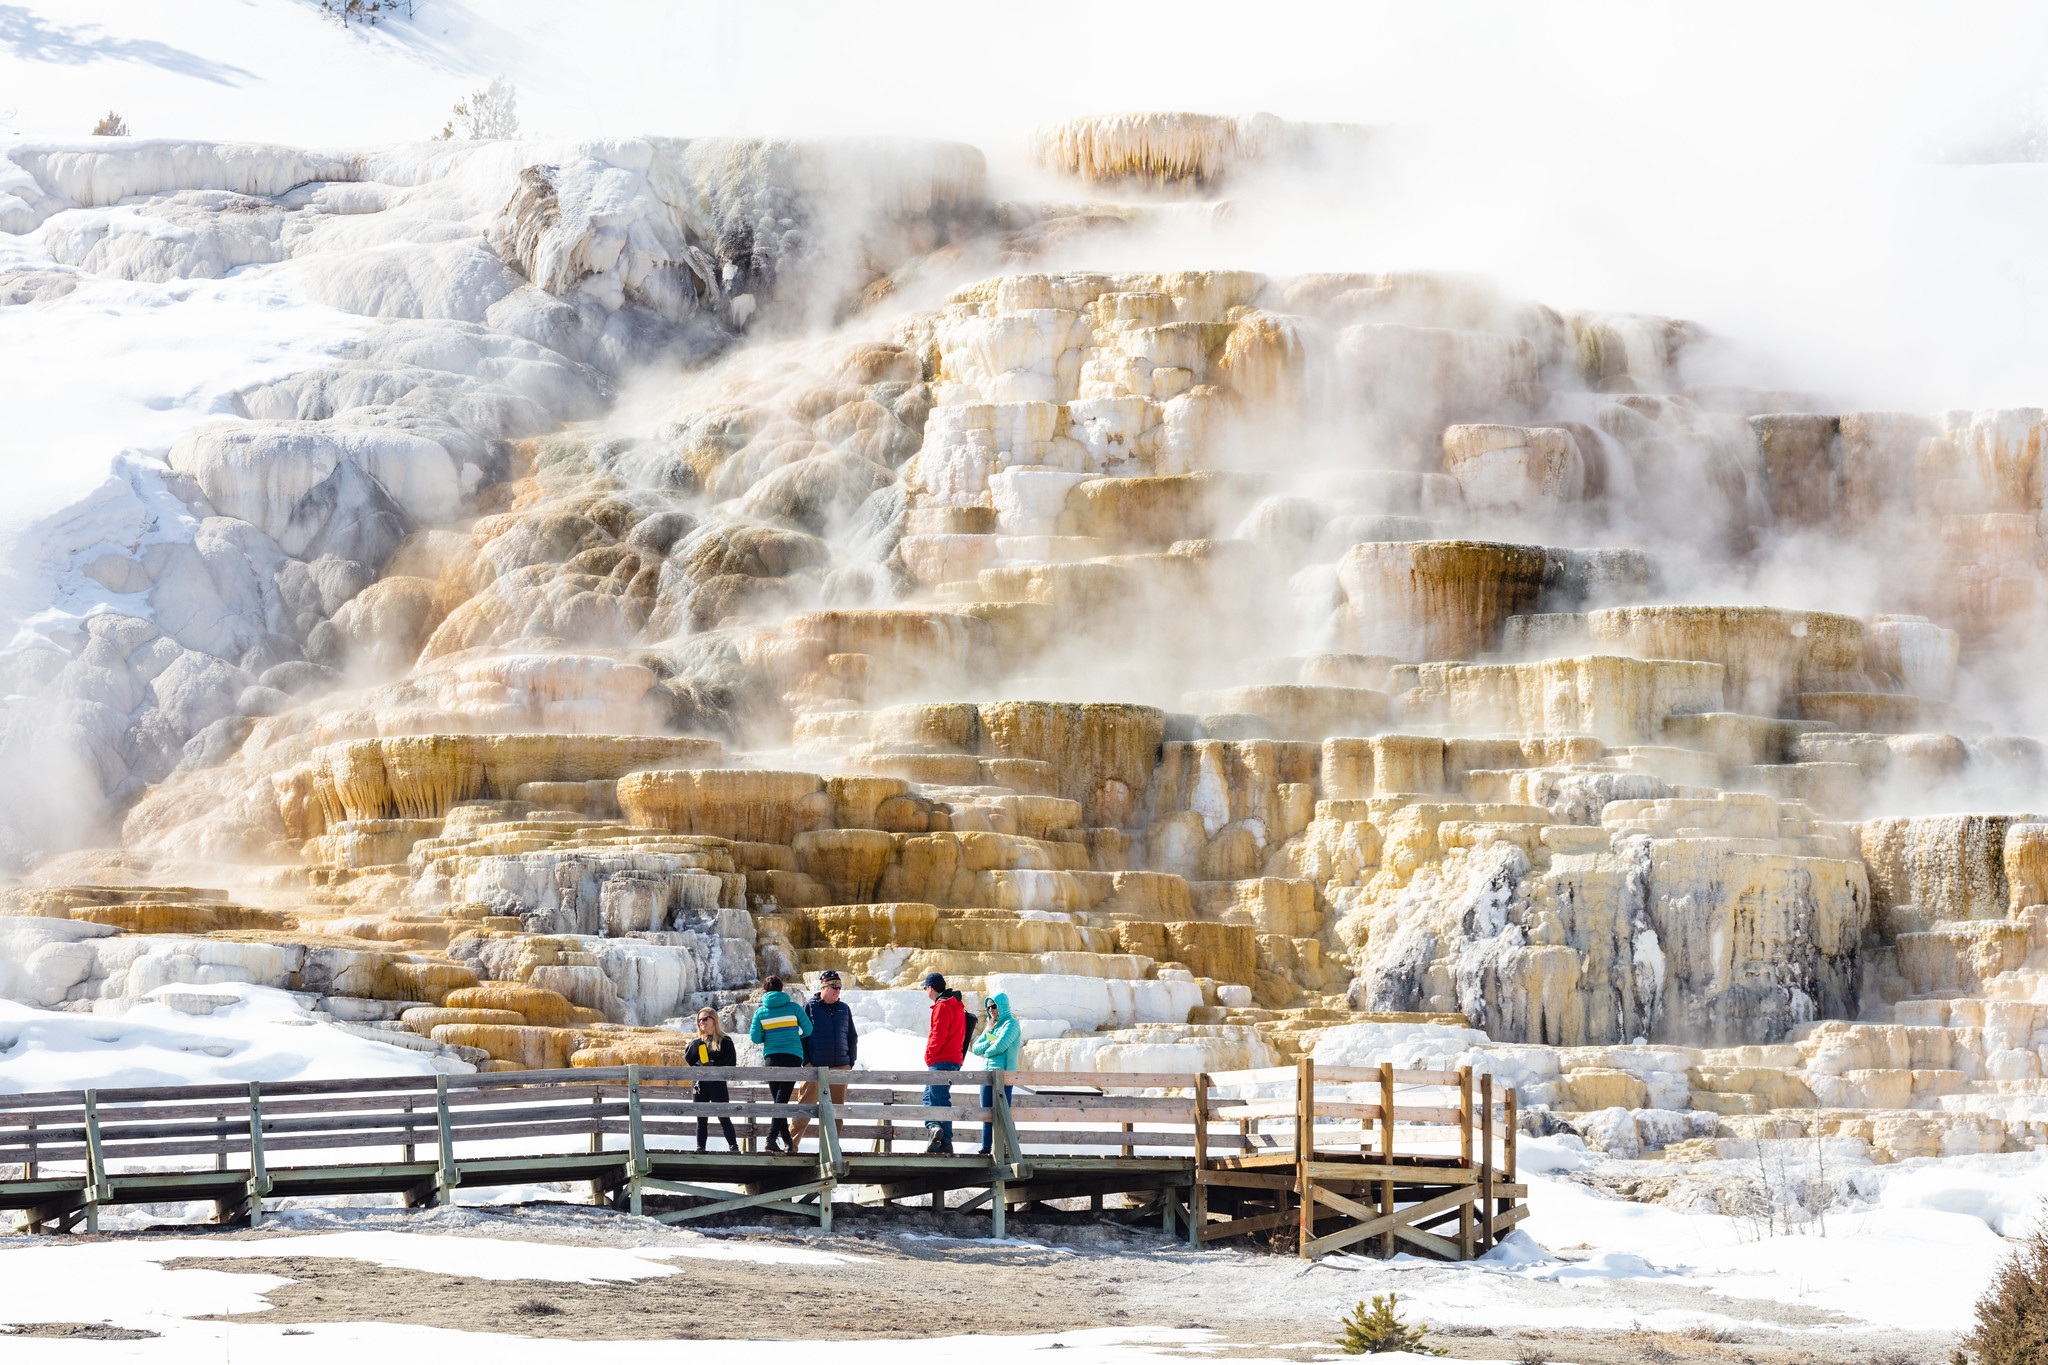 people walking on a boardwalk in front of a thermal feature